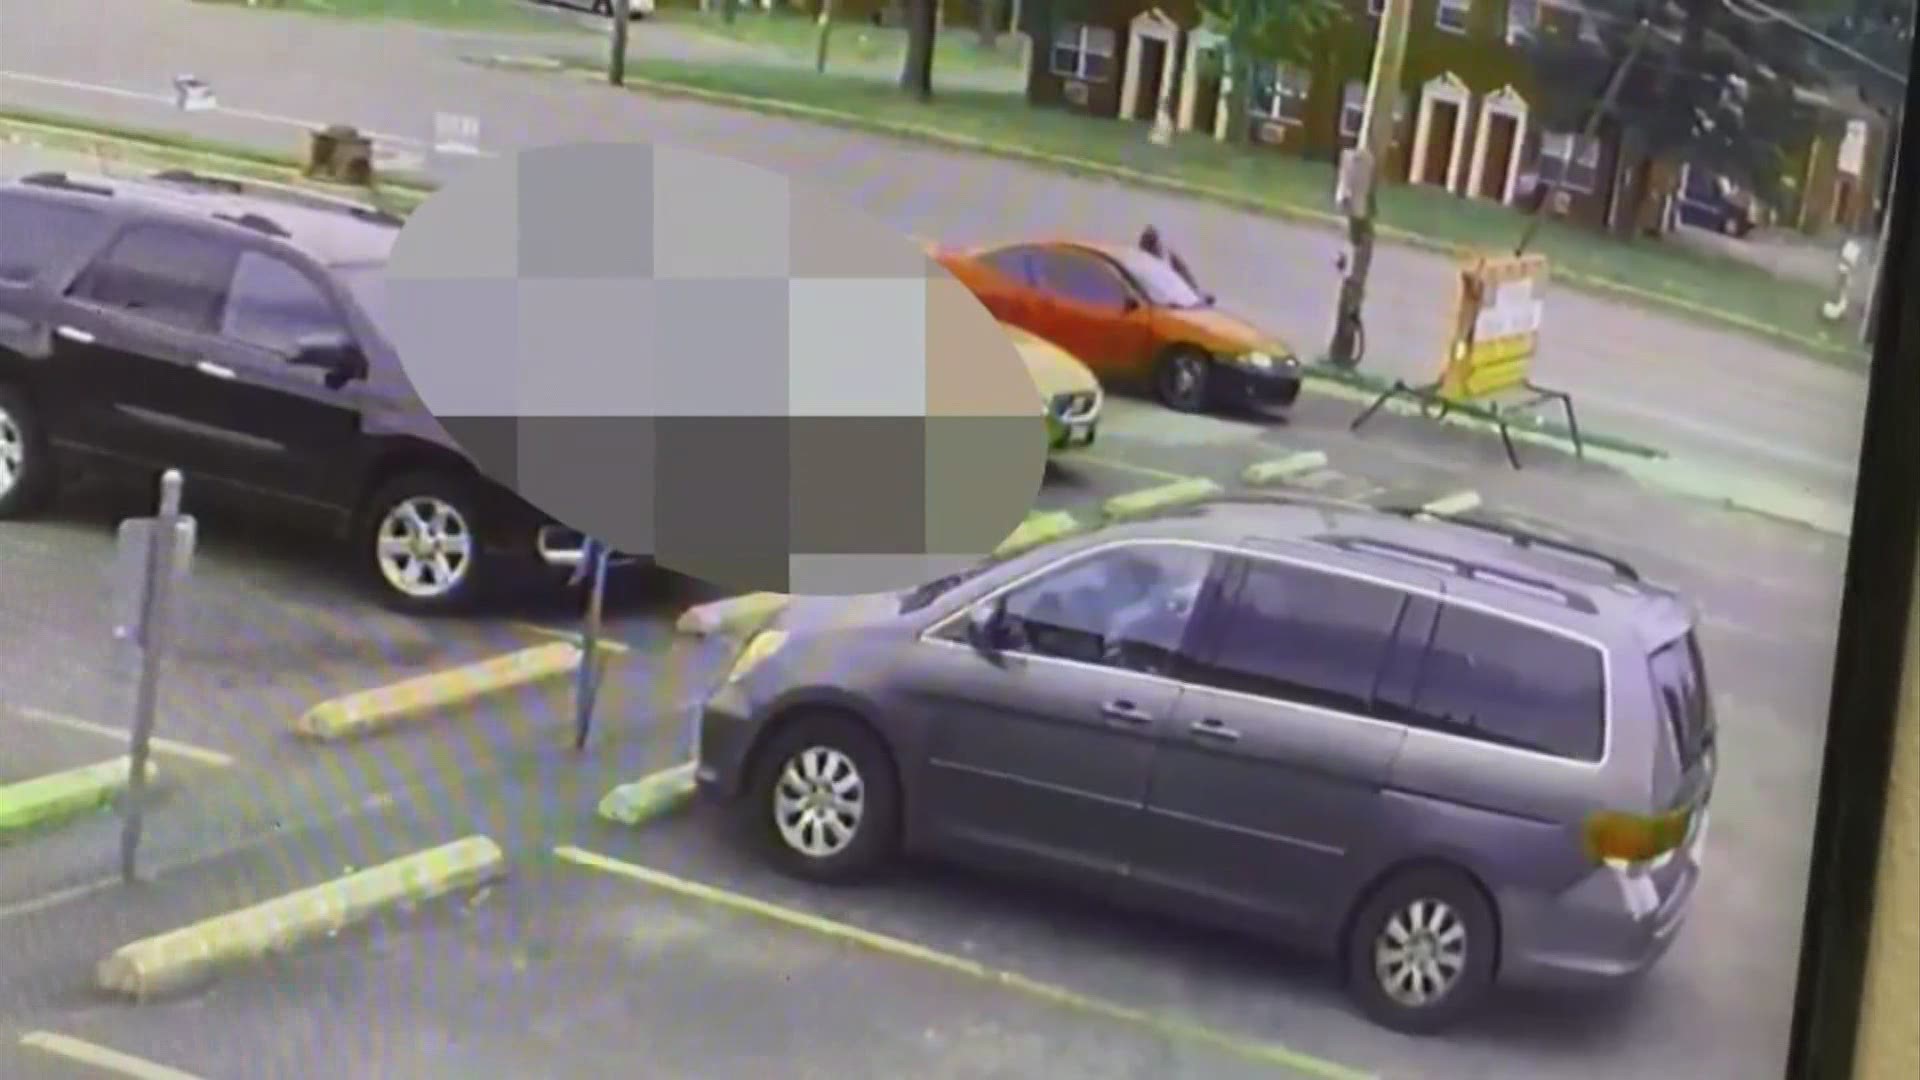 A business released surveillance video on Friday of a shooting that happened in its parking lot in east Columbus